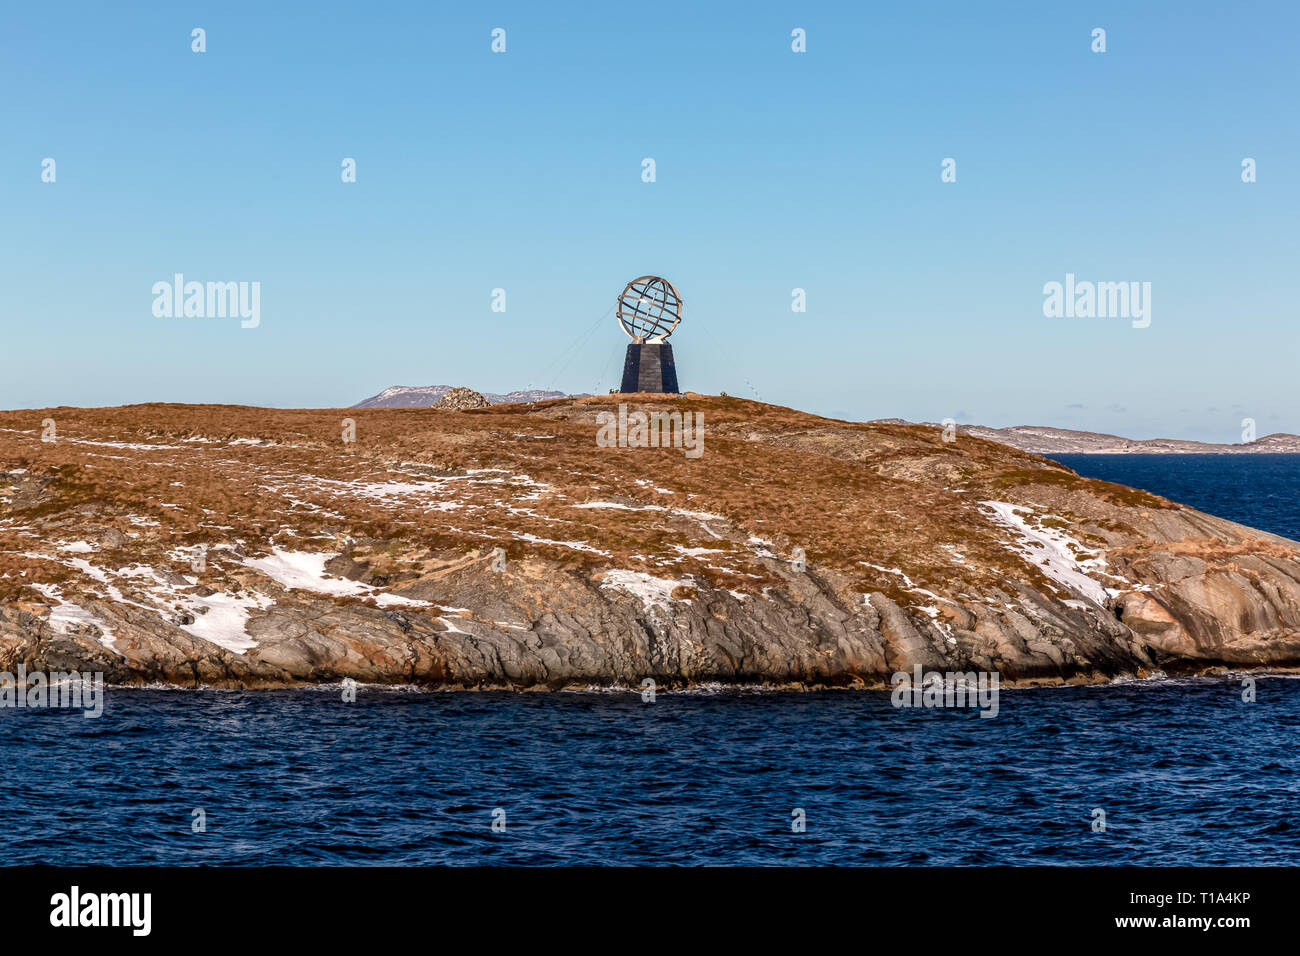 The Arctic Circle monument on Little Vikingen Island in Norway, marking the line of the Arctic Circle. Stock Photo